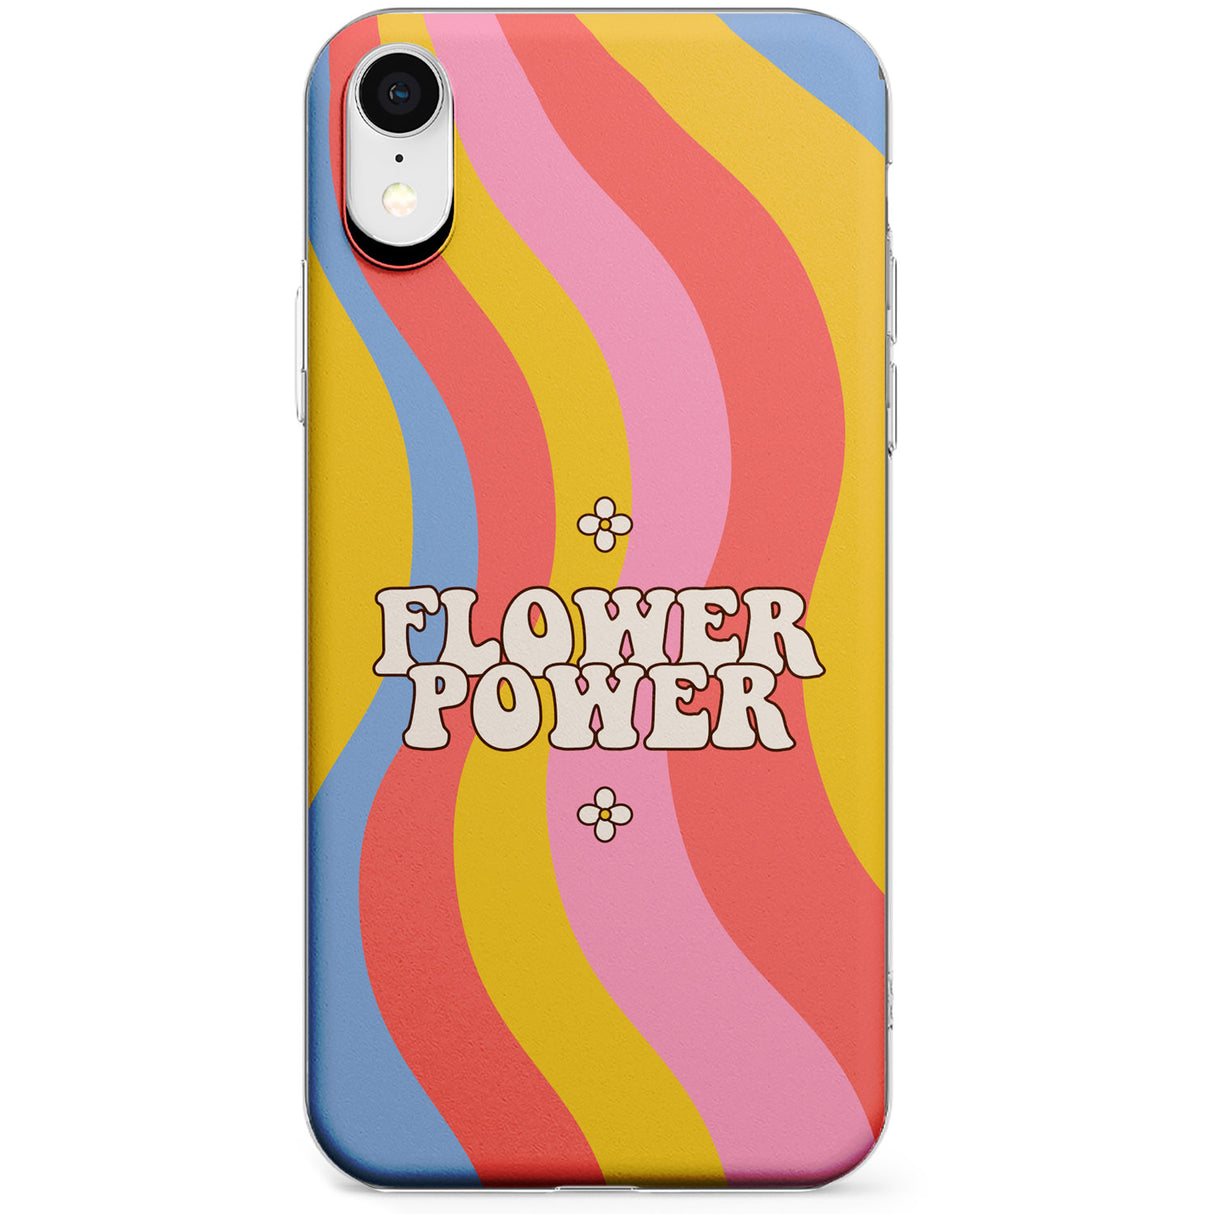 Melting Flower Power Phone Case for iPhone X, XS Max, XR